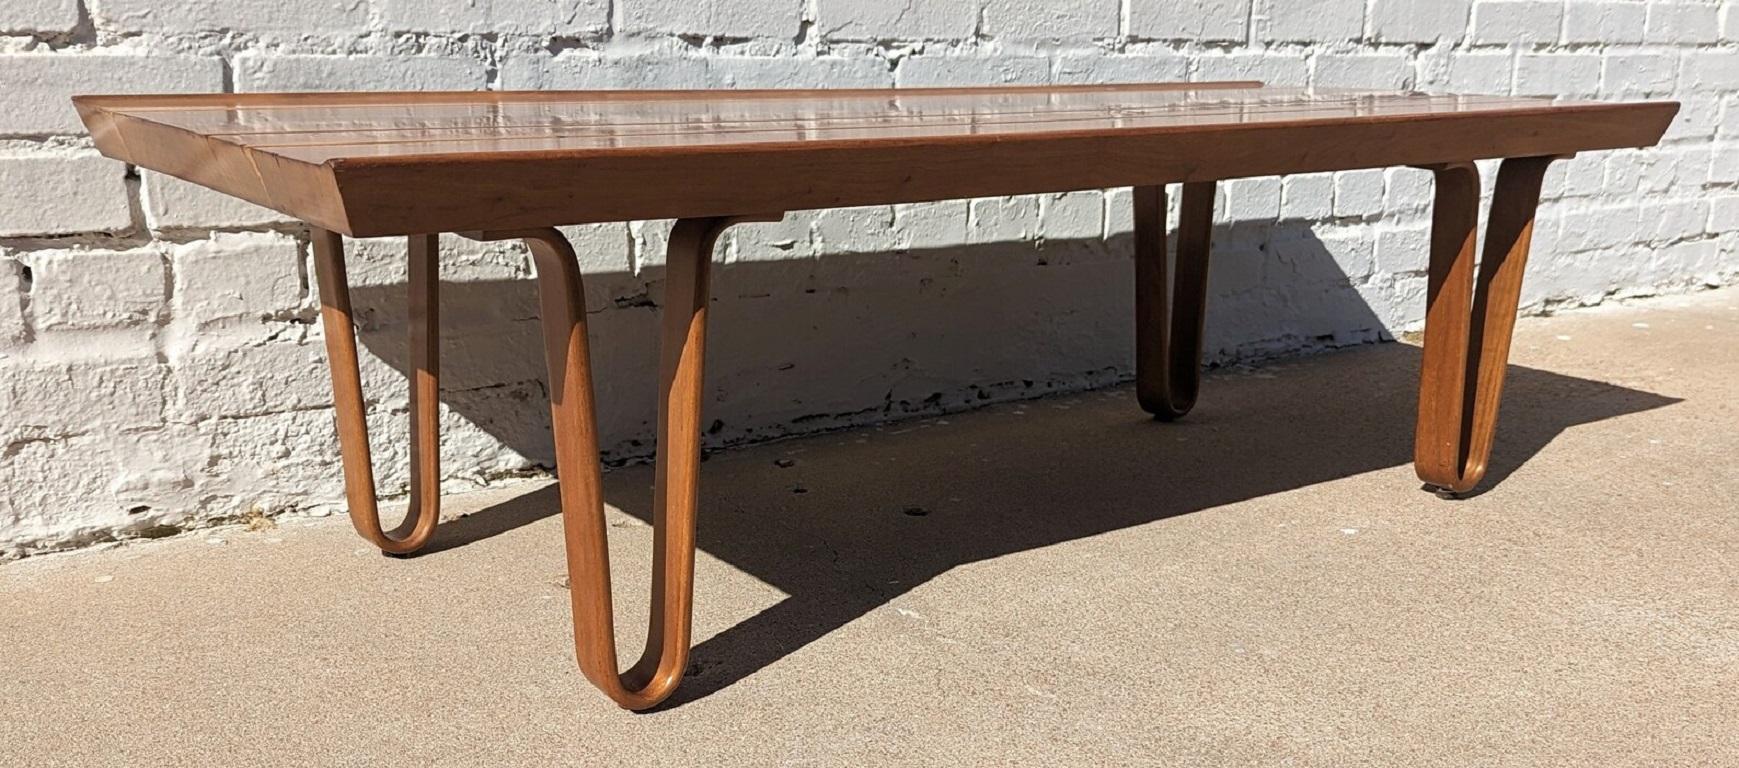 Mid Century Modern Edward Wormley for Dunbar Coffee Table Bench

Good vintage condition and structurally sound. Top has some scratching in the middle and some expected finish wear.
Additional information:
Materials: Walnut.Oak
Vintage from the